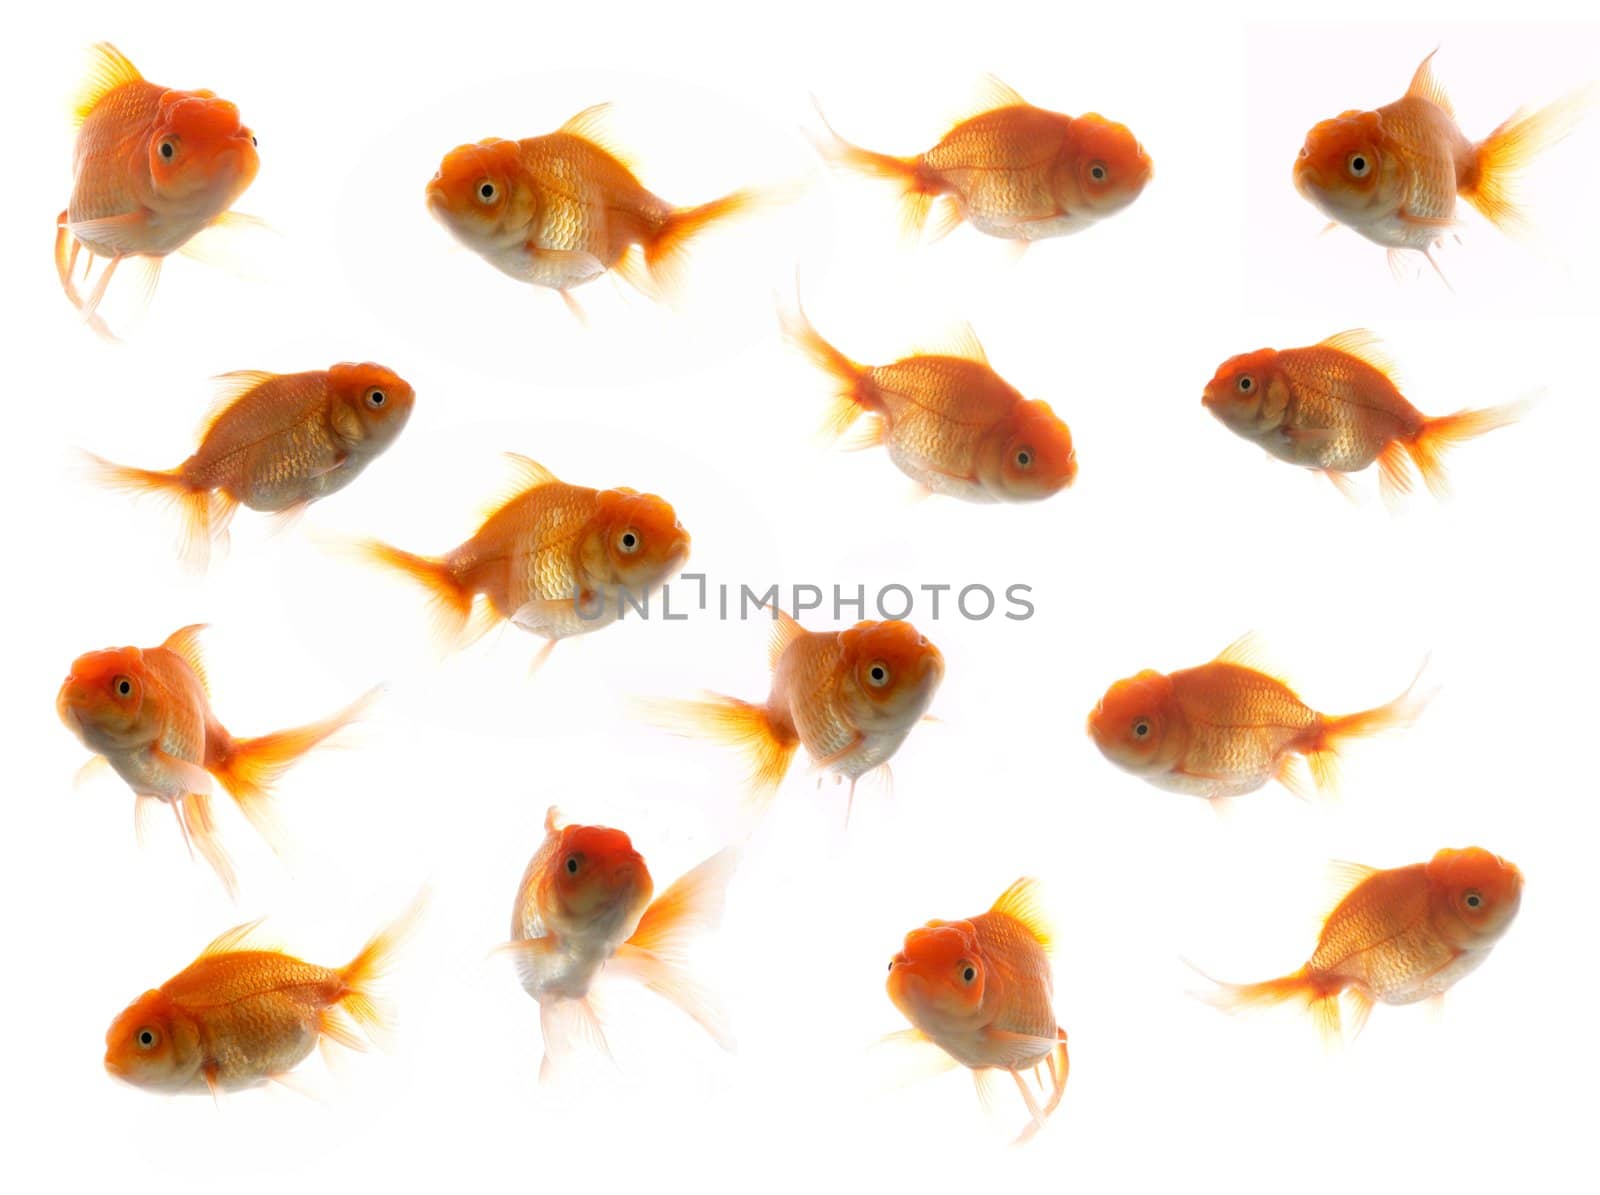 An image of much goldfish